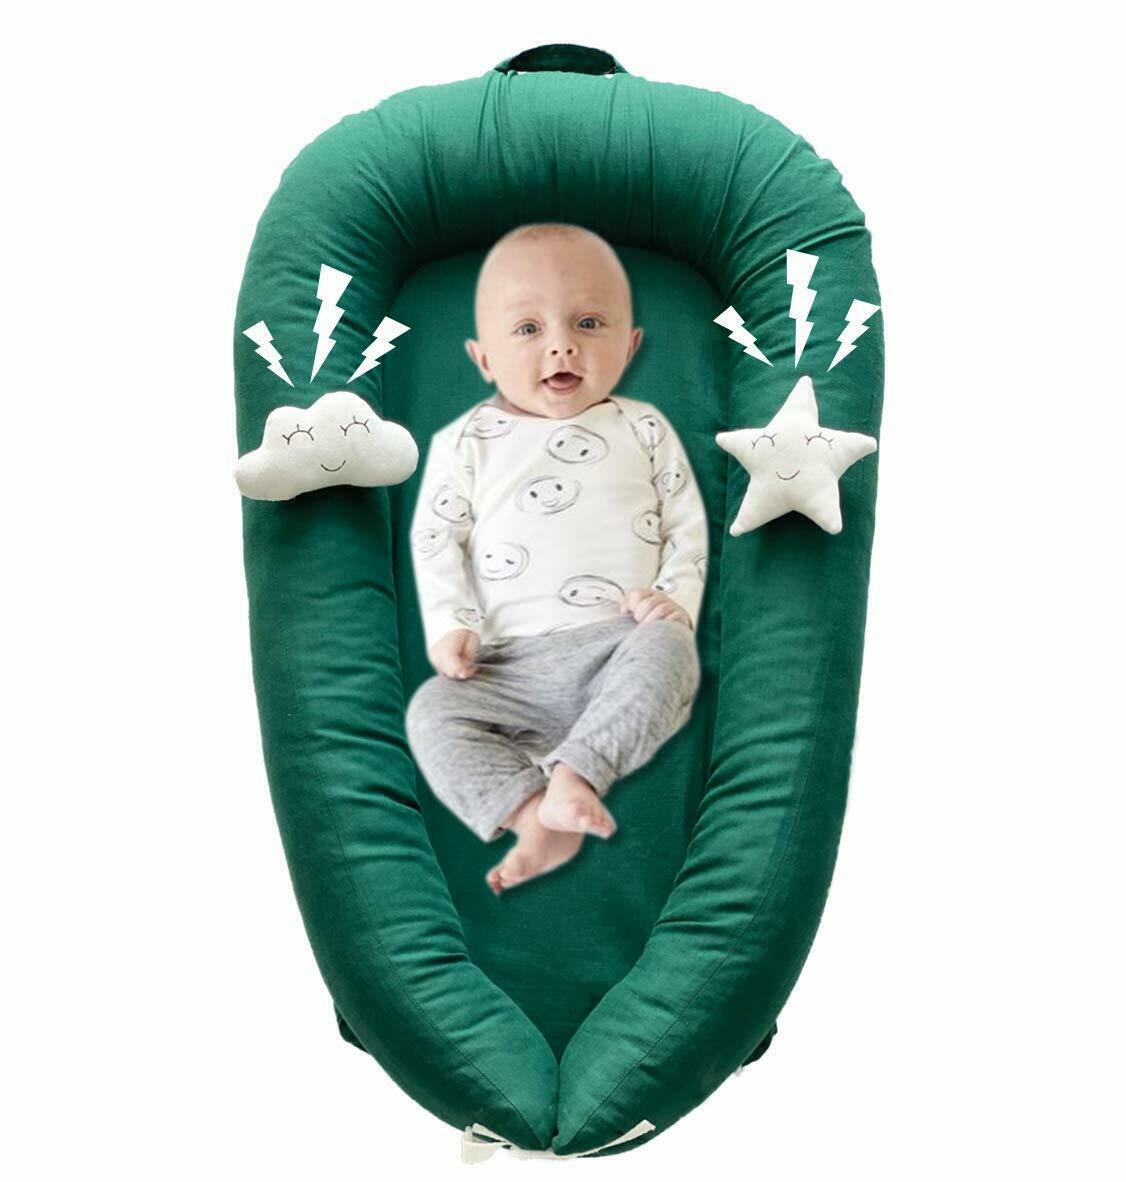 Baby Lounger for Newborns (Feather)